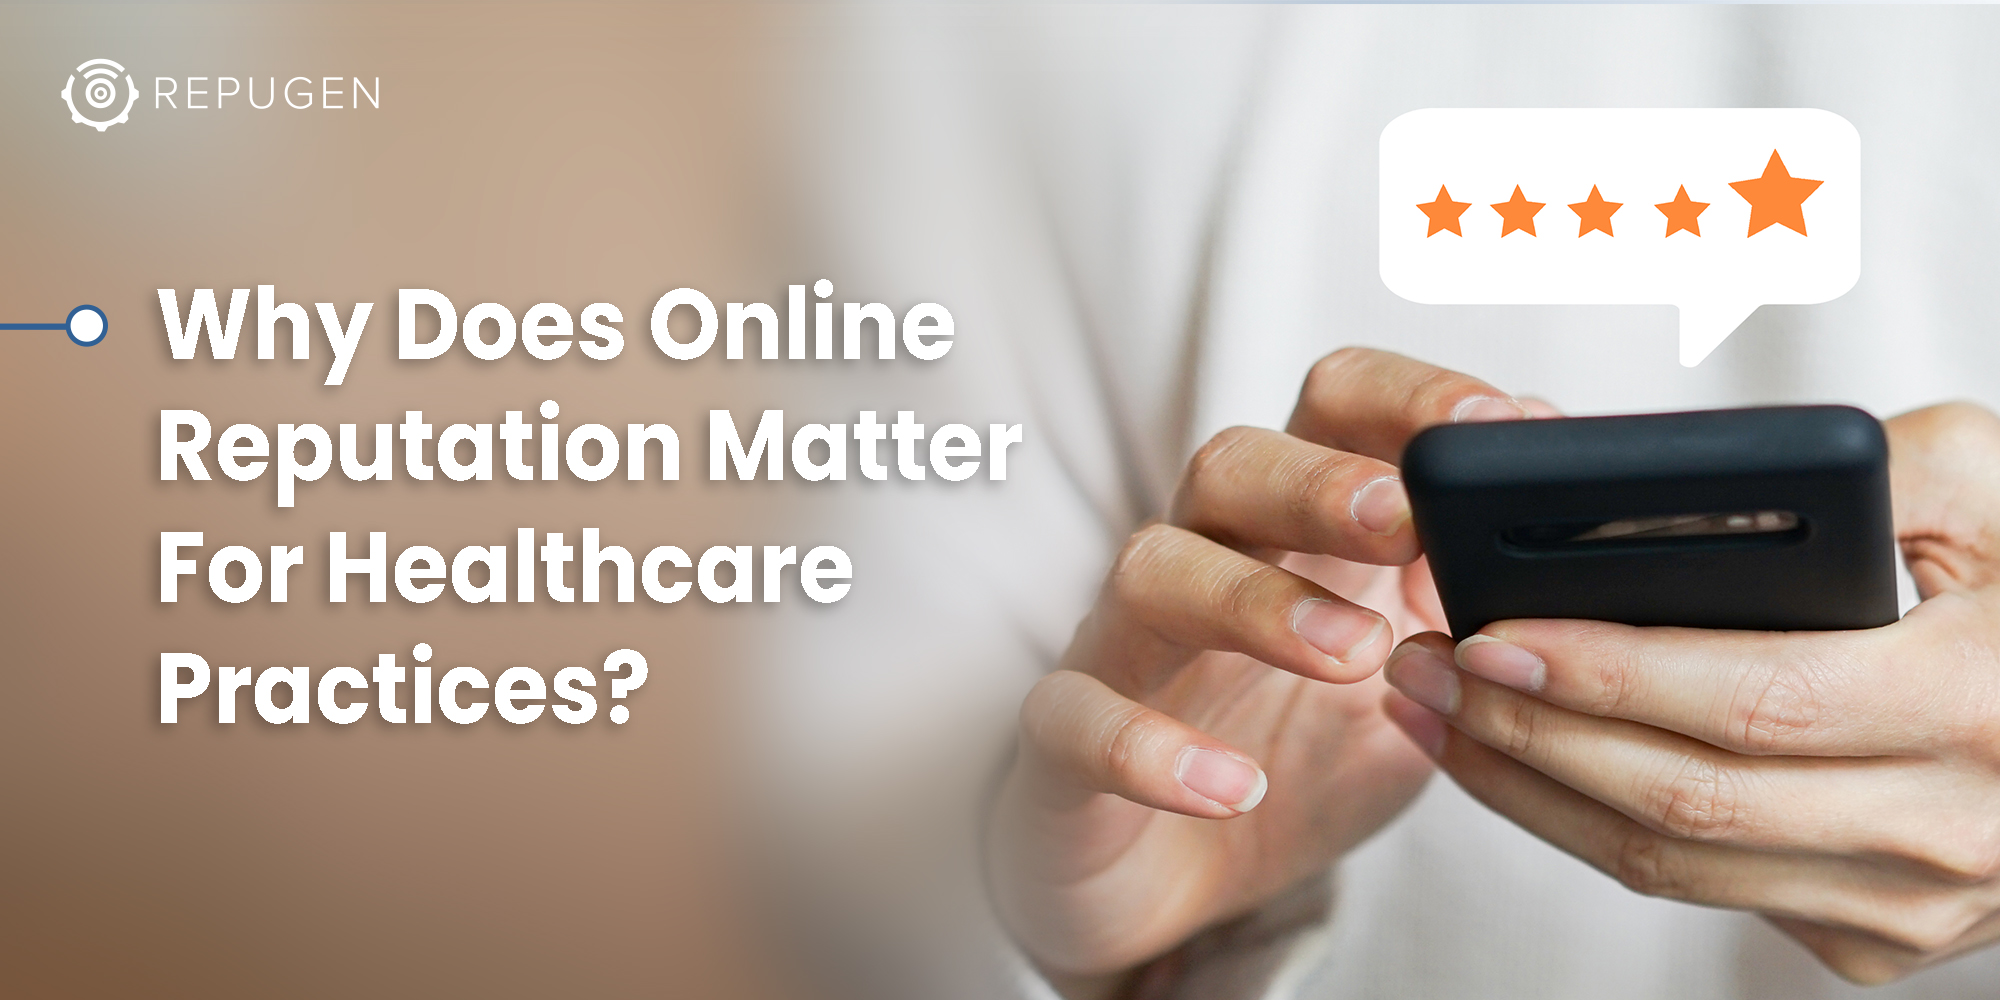 Why Does Online Reputation Matter in Healthcare?